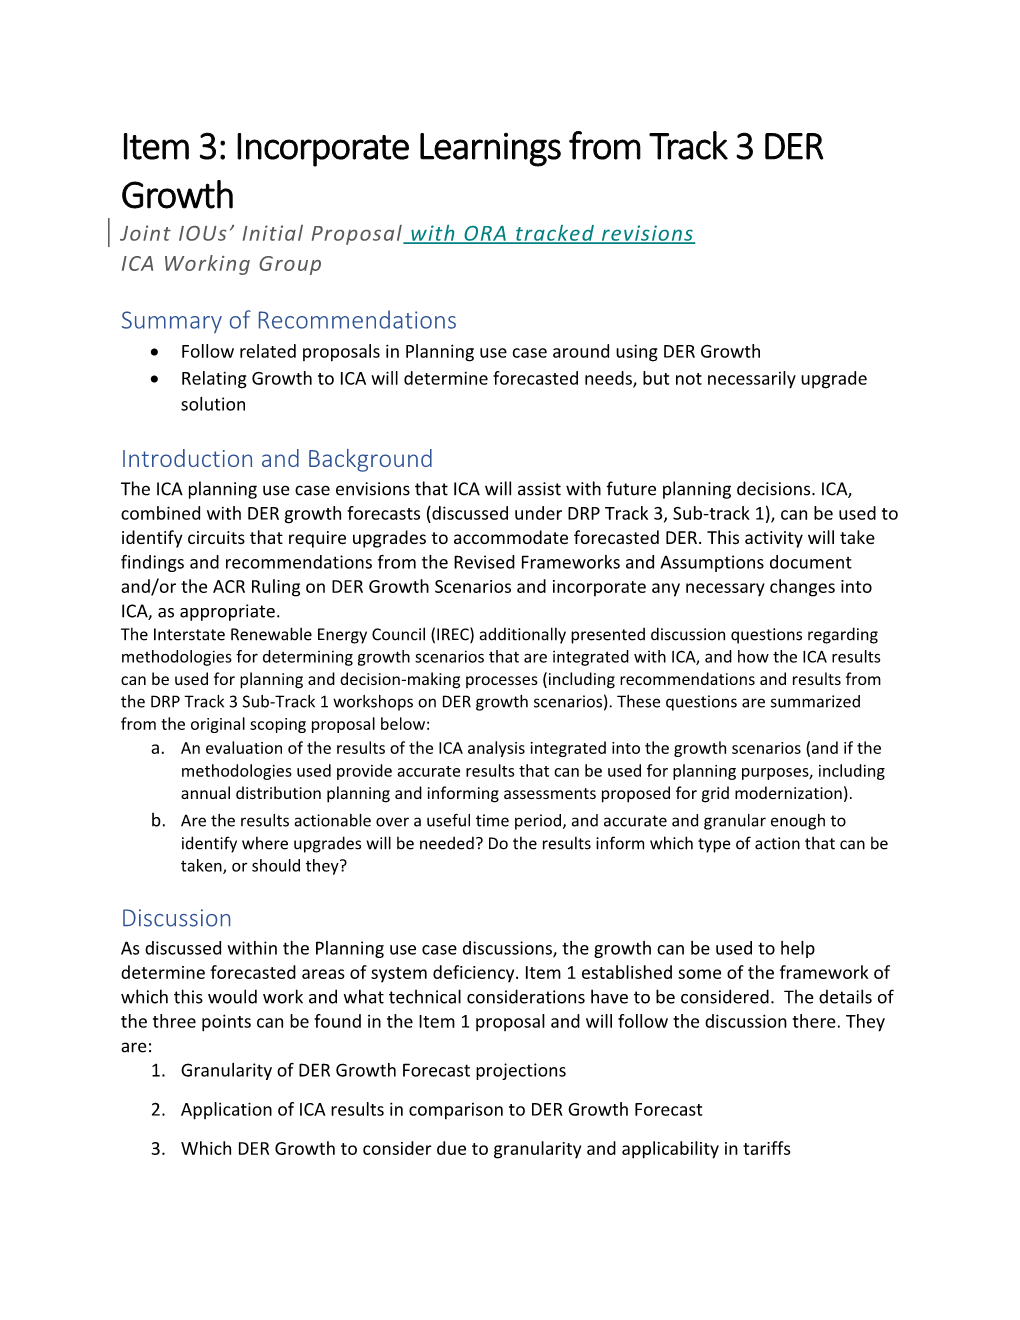 Item 3: Incorporate Learnings from Track 3 DER Growth